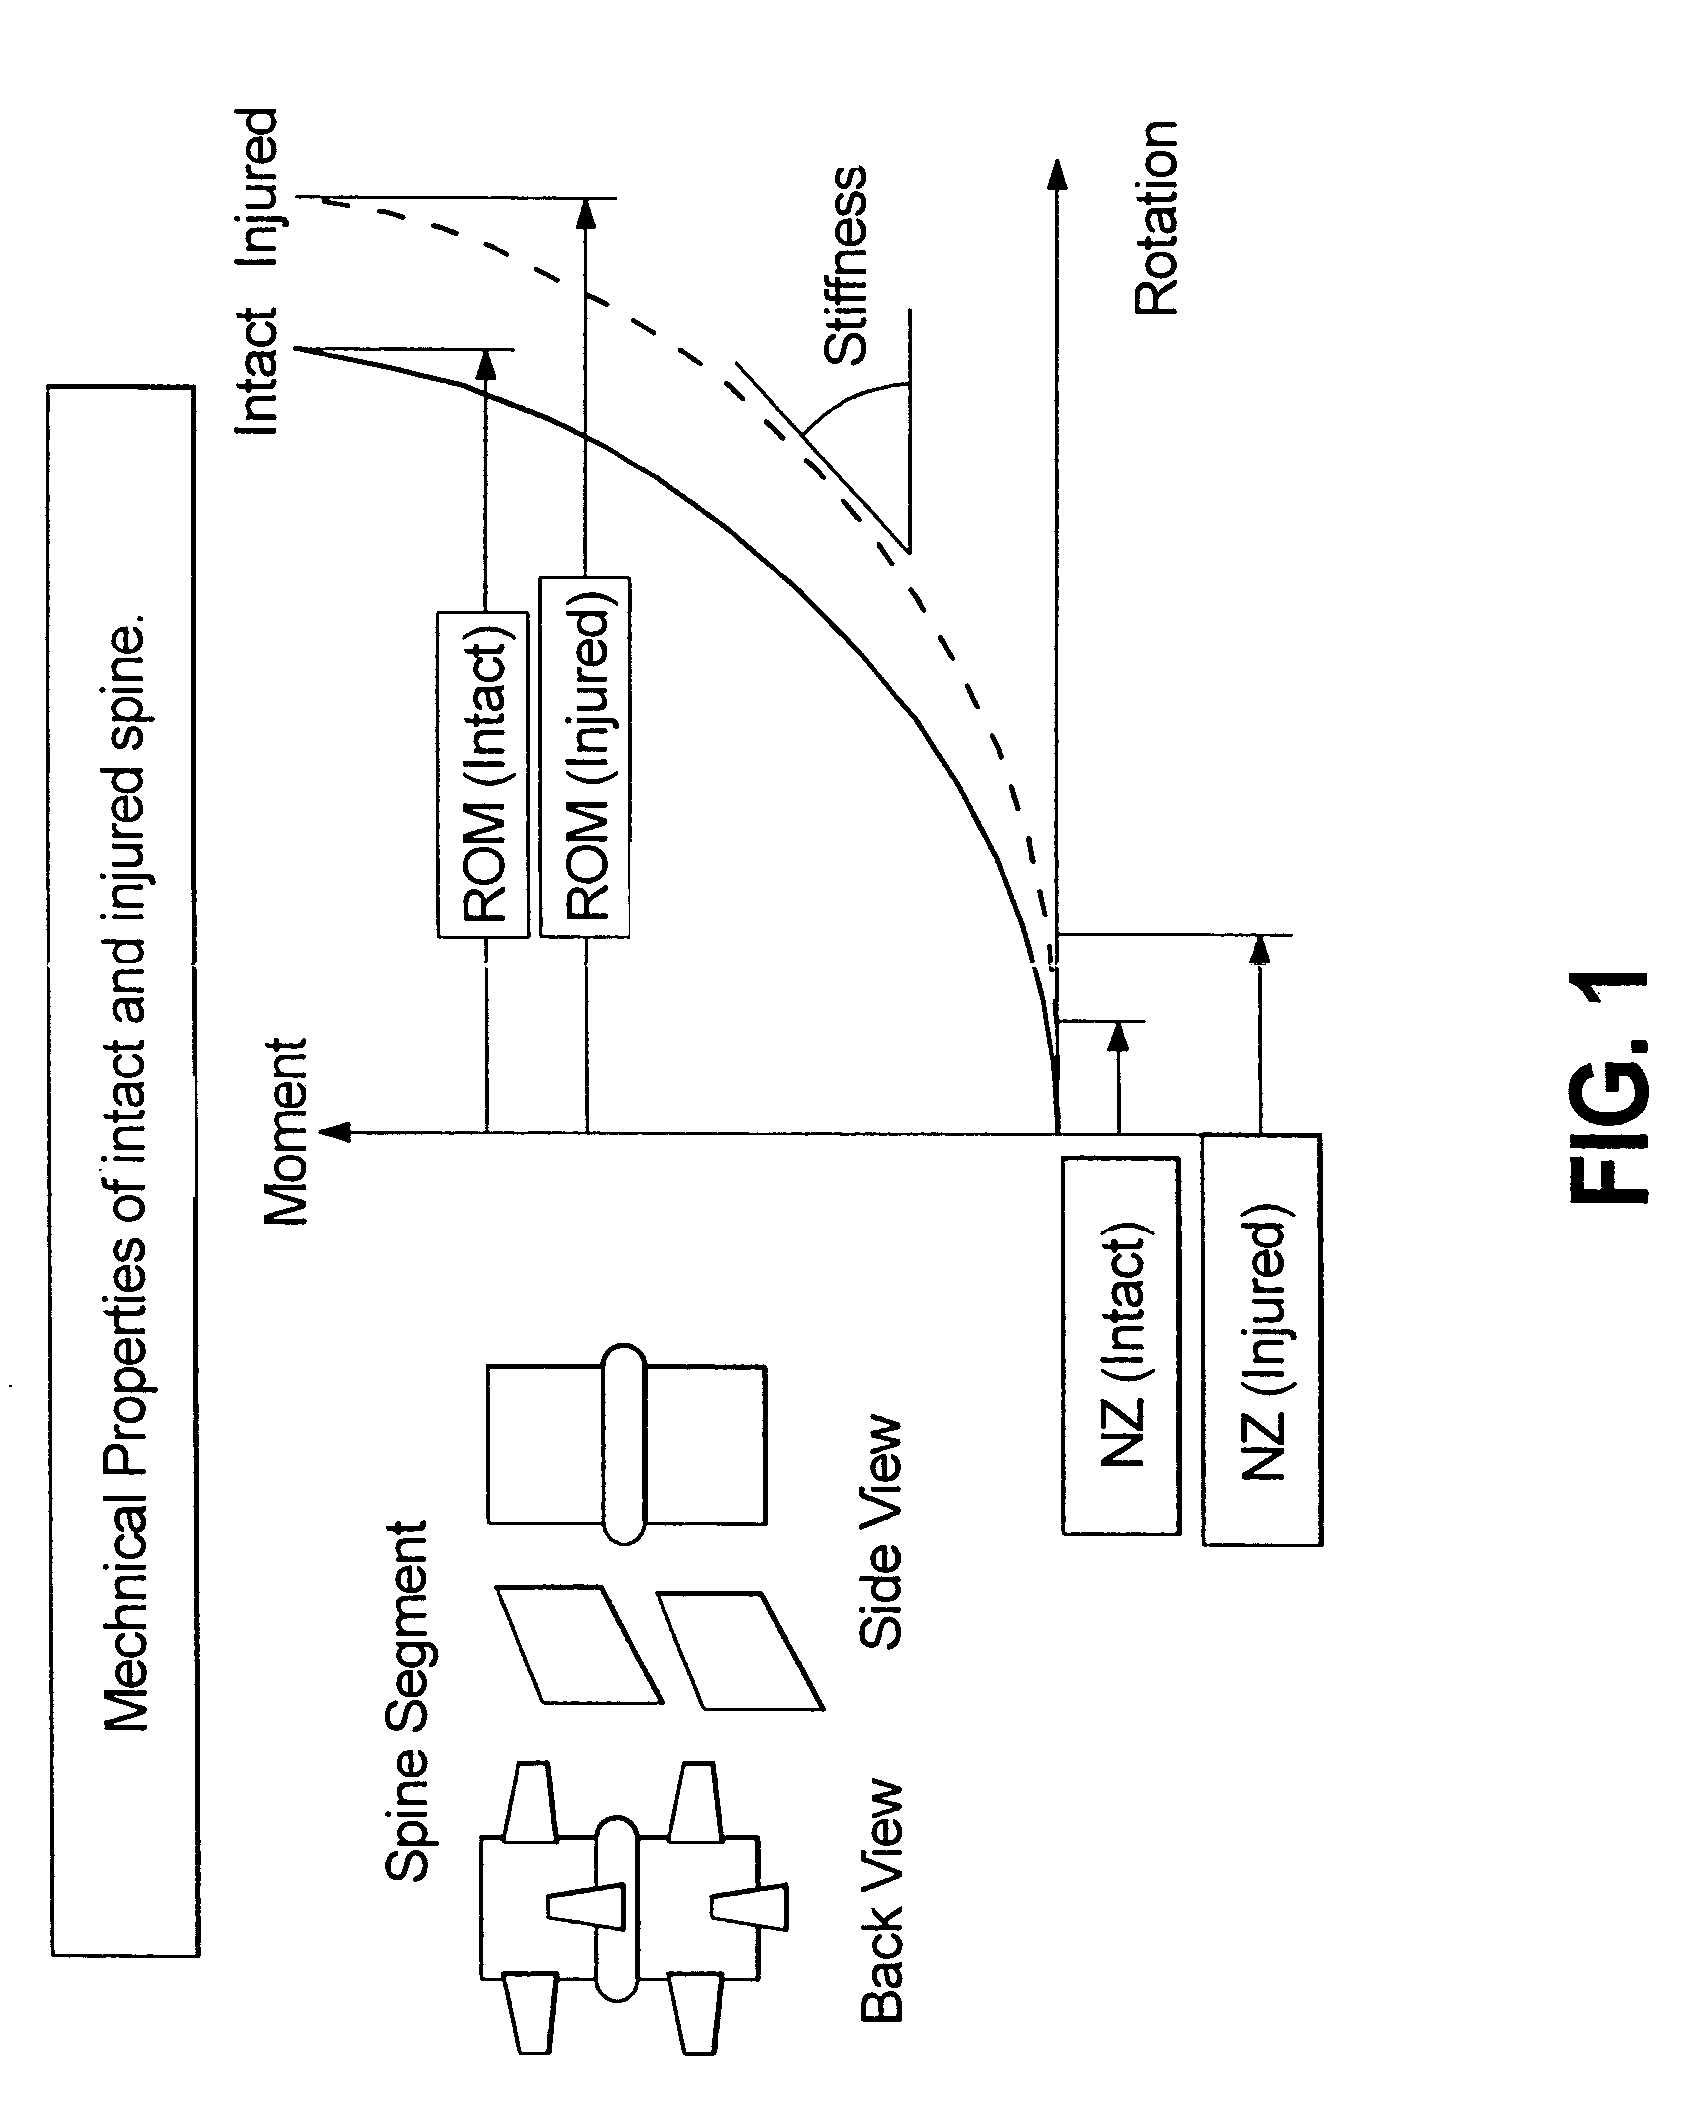 Pedicle screw assembly with bearing surfaces